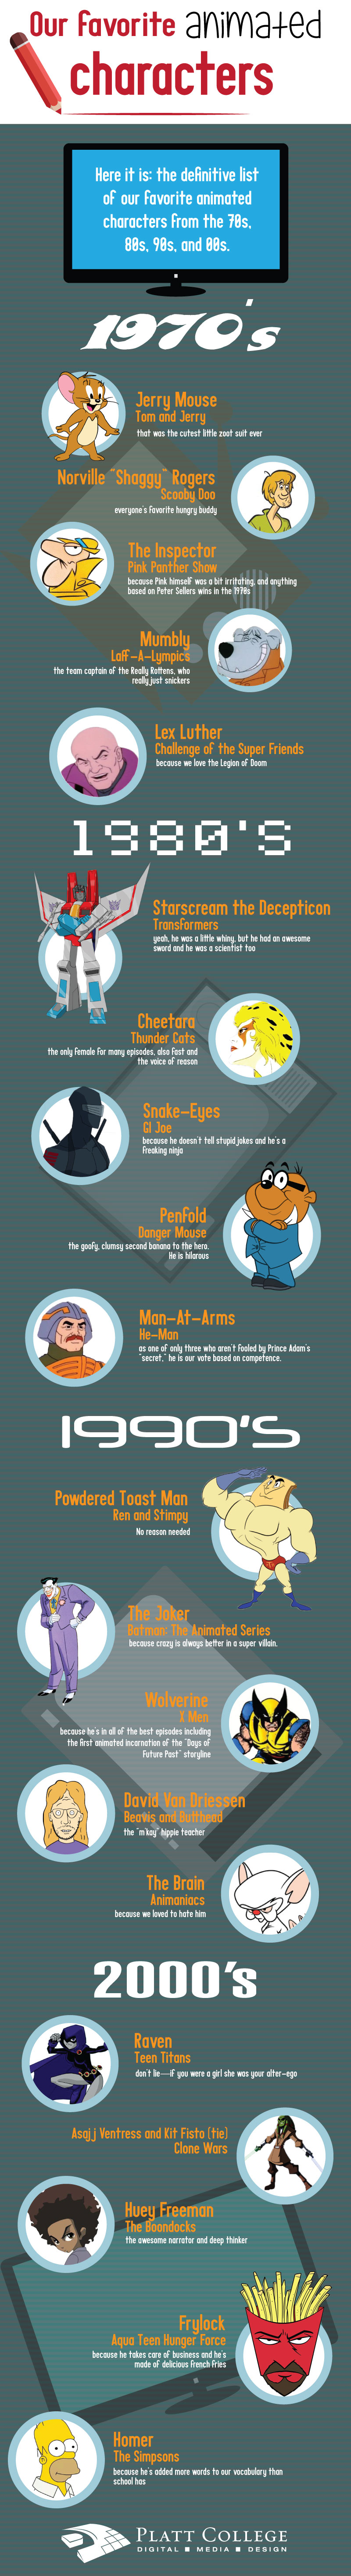 Favorite Animated Characters - Infographic